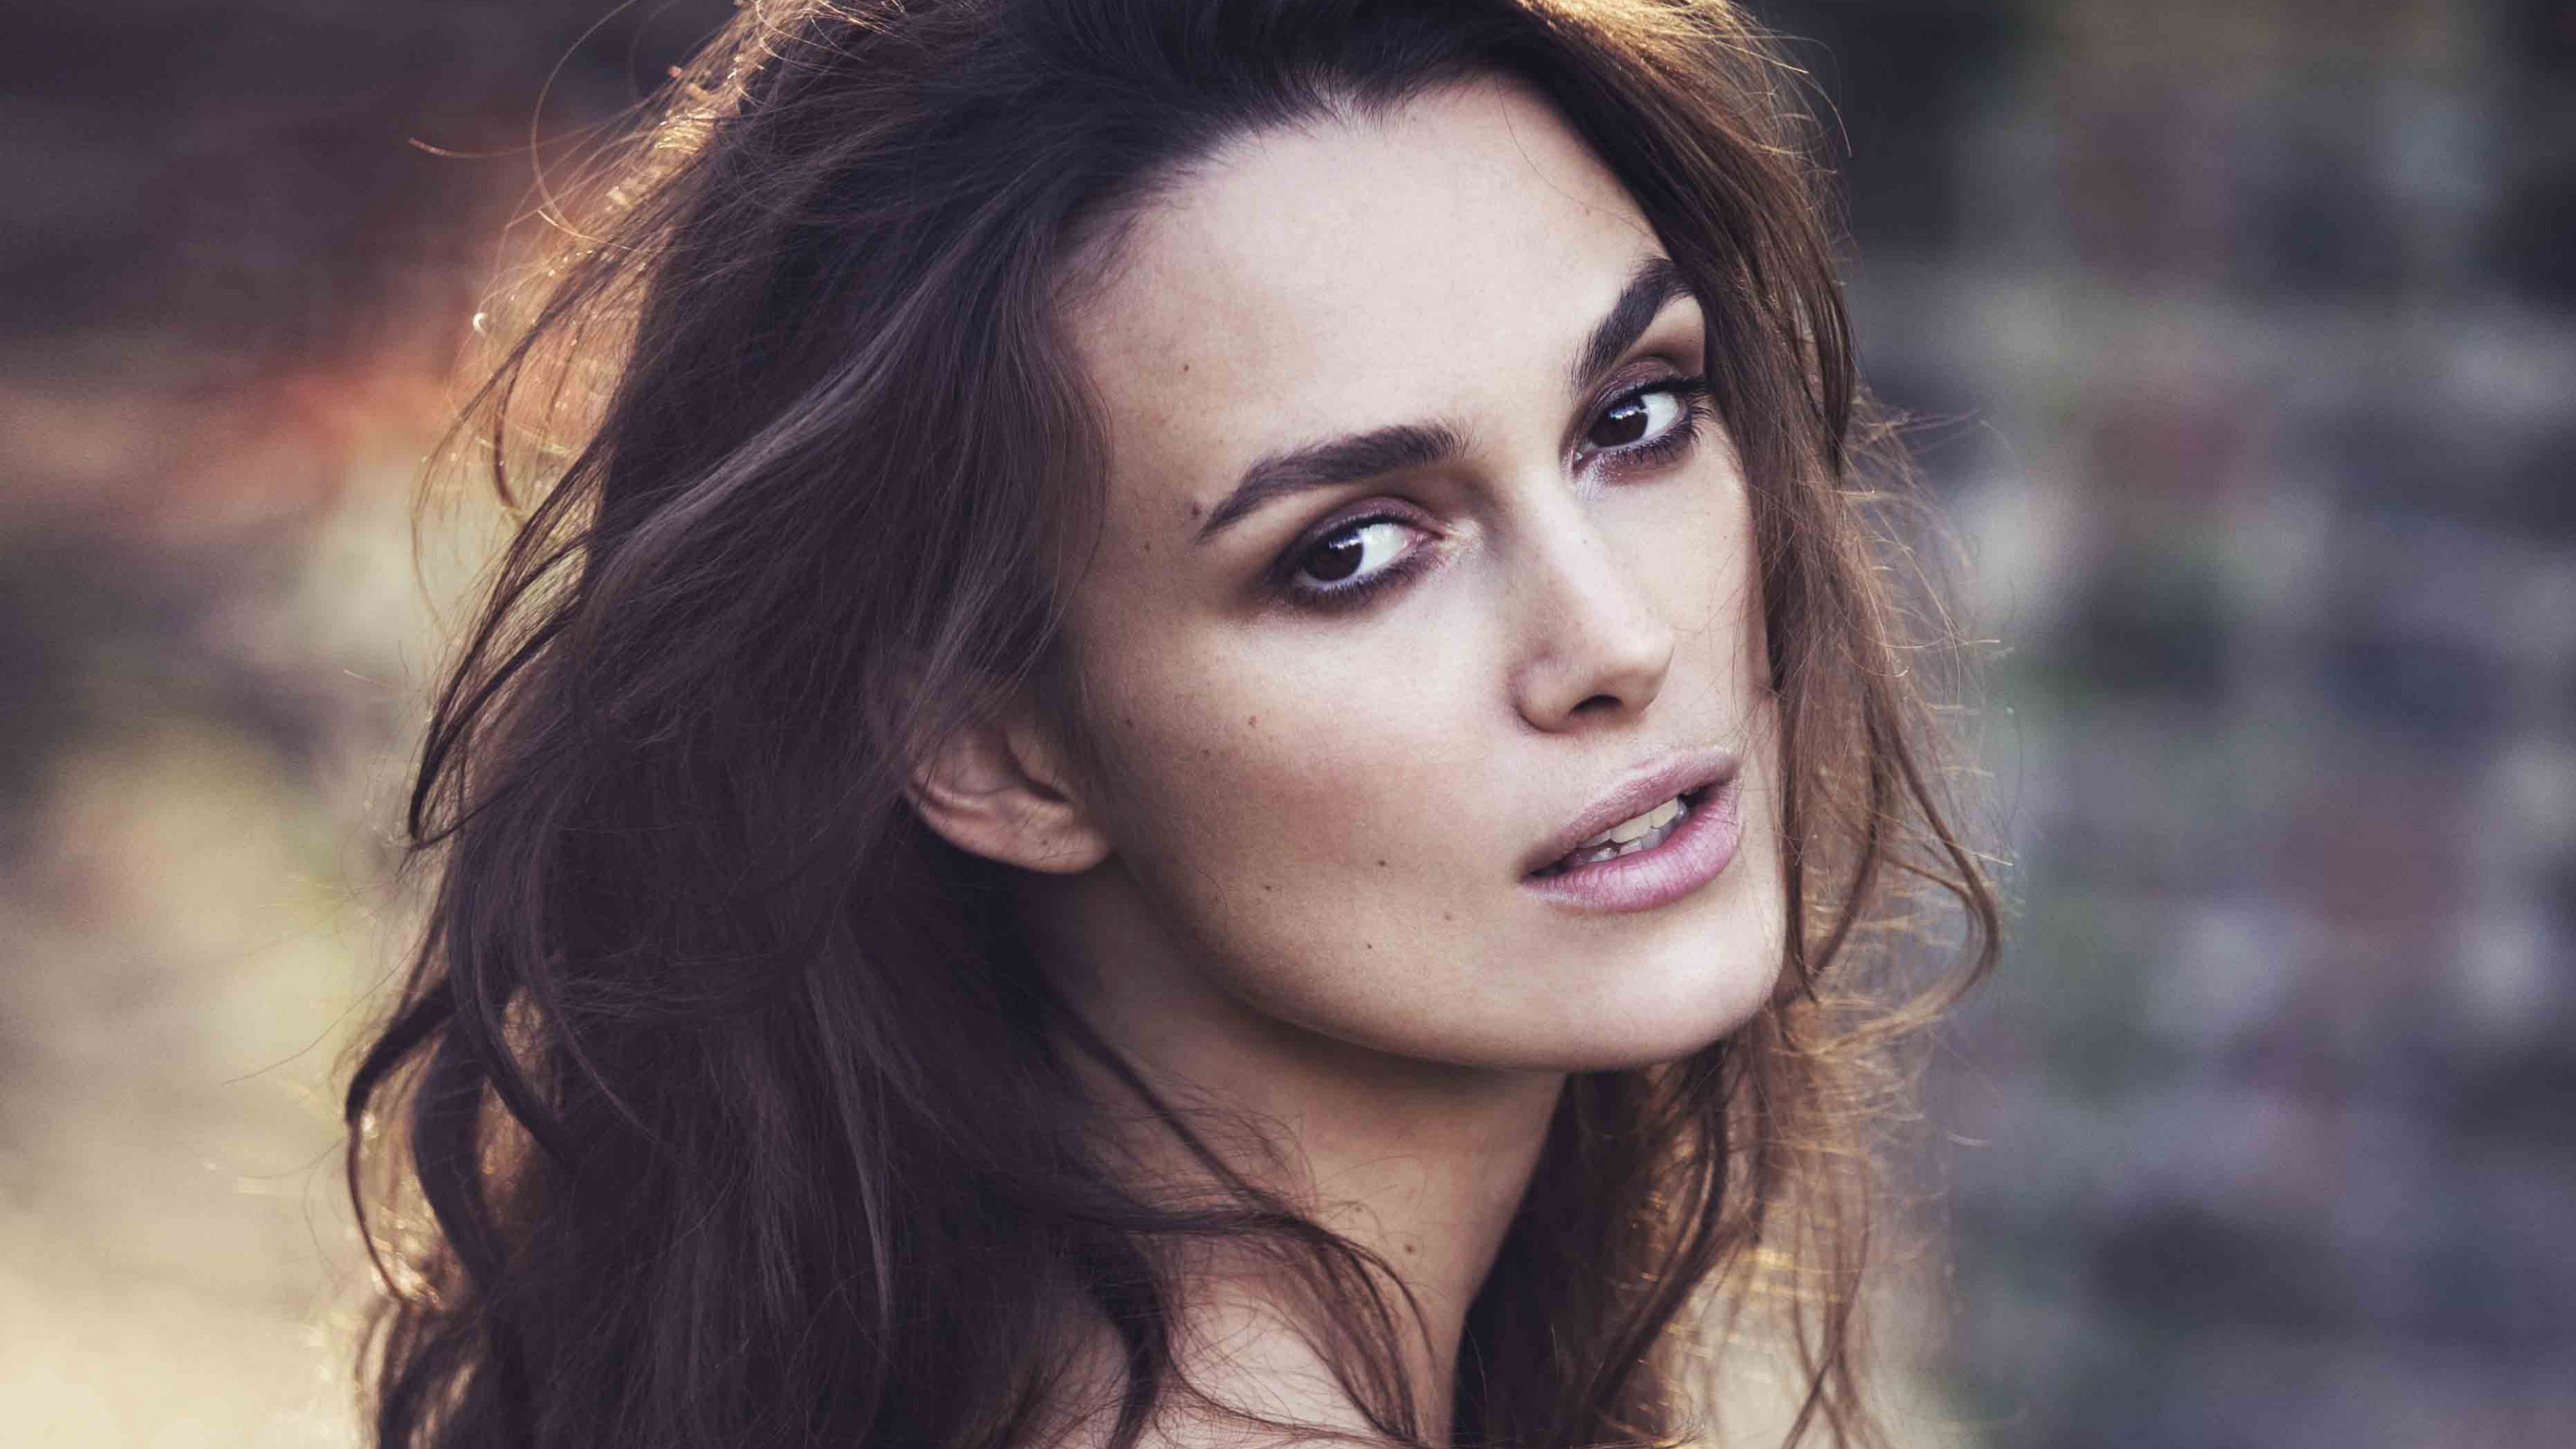 keira knightley hd wallpapers,hair,face,eyebrow,hairstyle,beauty